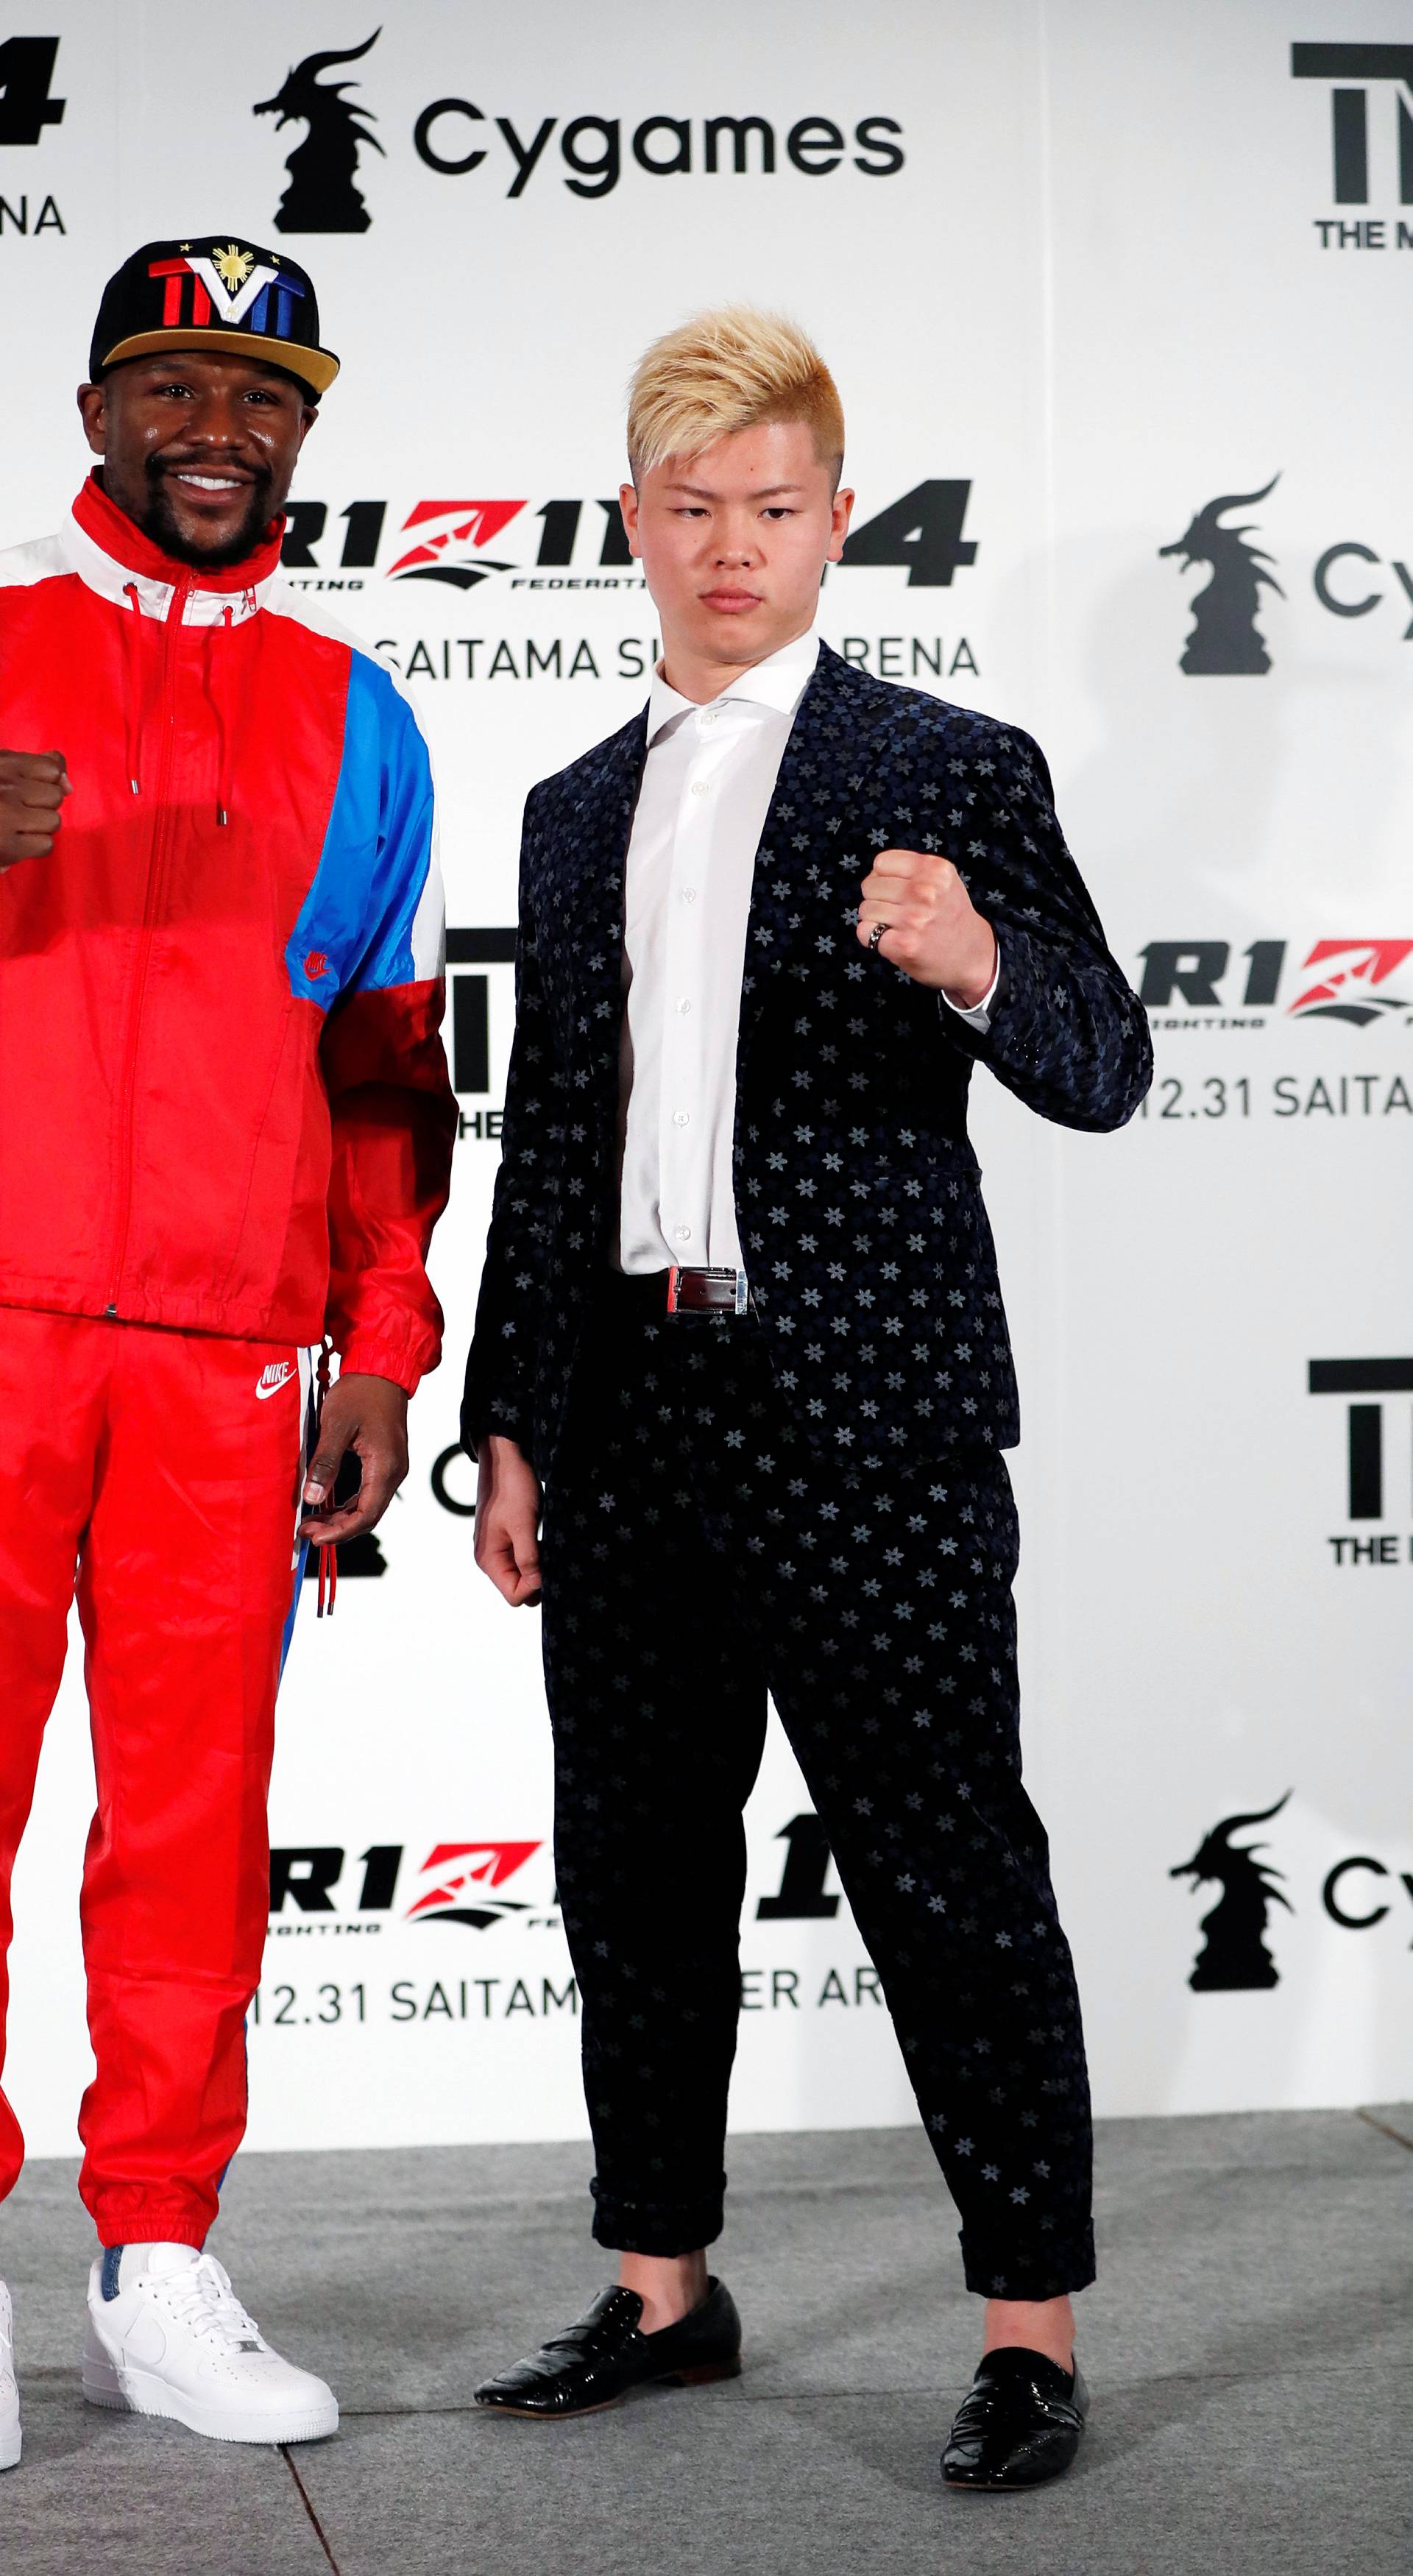 Undefeated boxer Floyd Mayweather Jr. of the U.S. poses for a photograph with his opponent Tenshin Nasukawa during a news conference in Tokyo